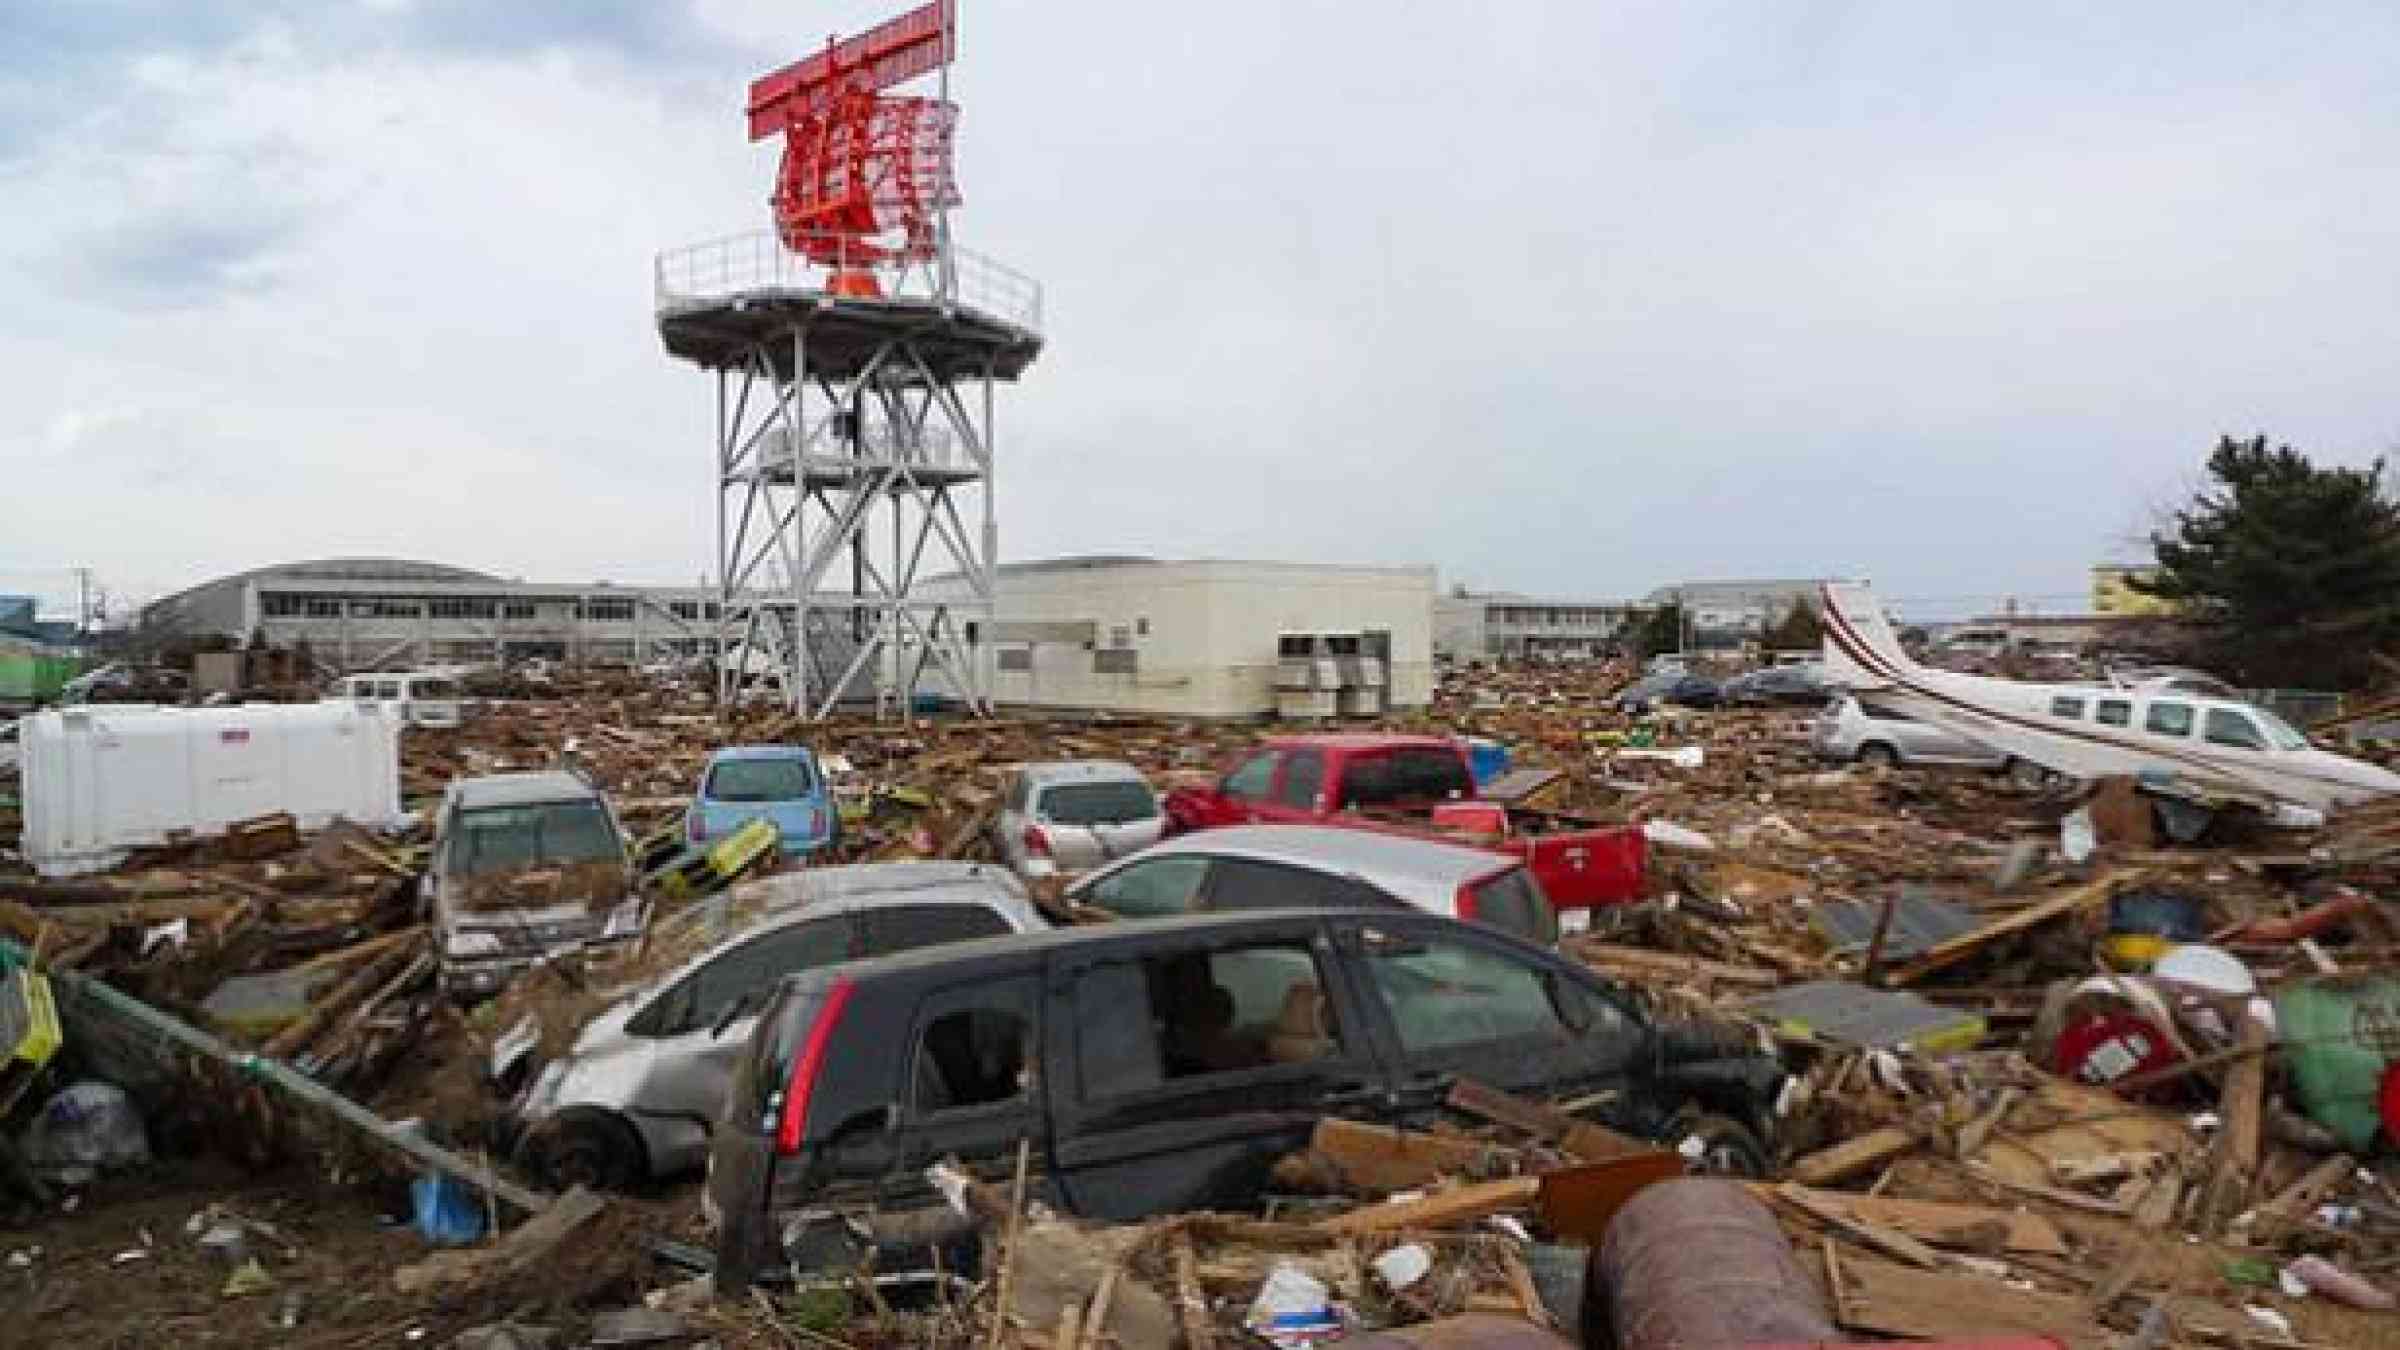 Photo by Flickr user Roberto De Vido CC BY 2.0 https://www.flickr.com/photos/bigocean/5531542919/  Debris scattered around airport in Sendai, Japan, after the devastating earthquake and tsunami in March 2011.